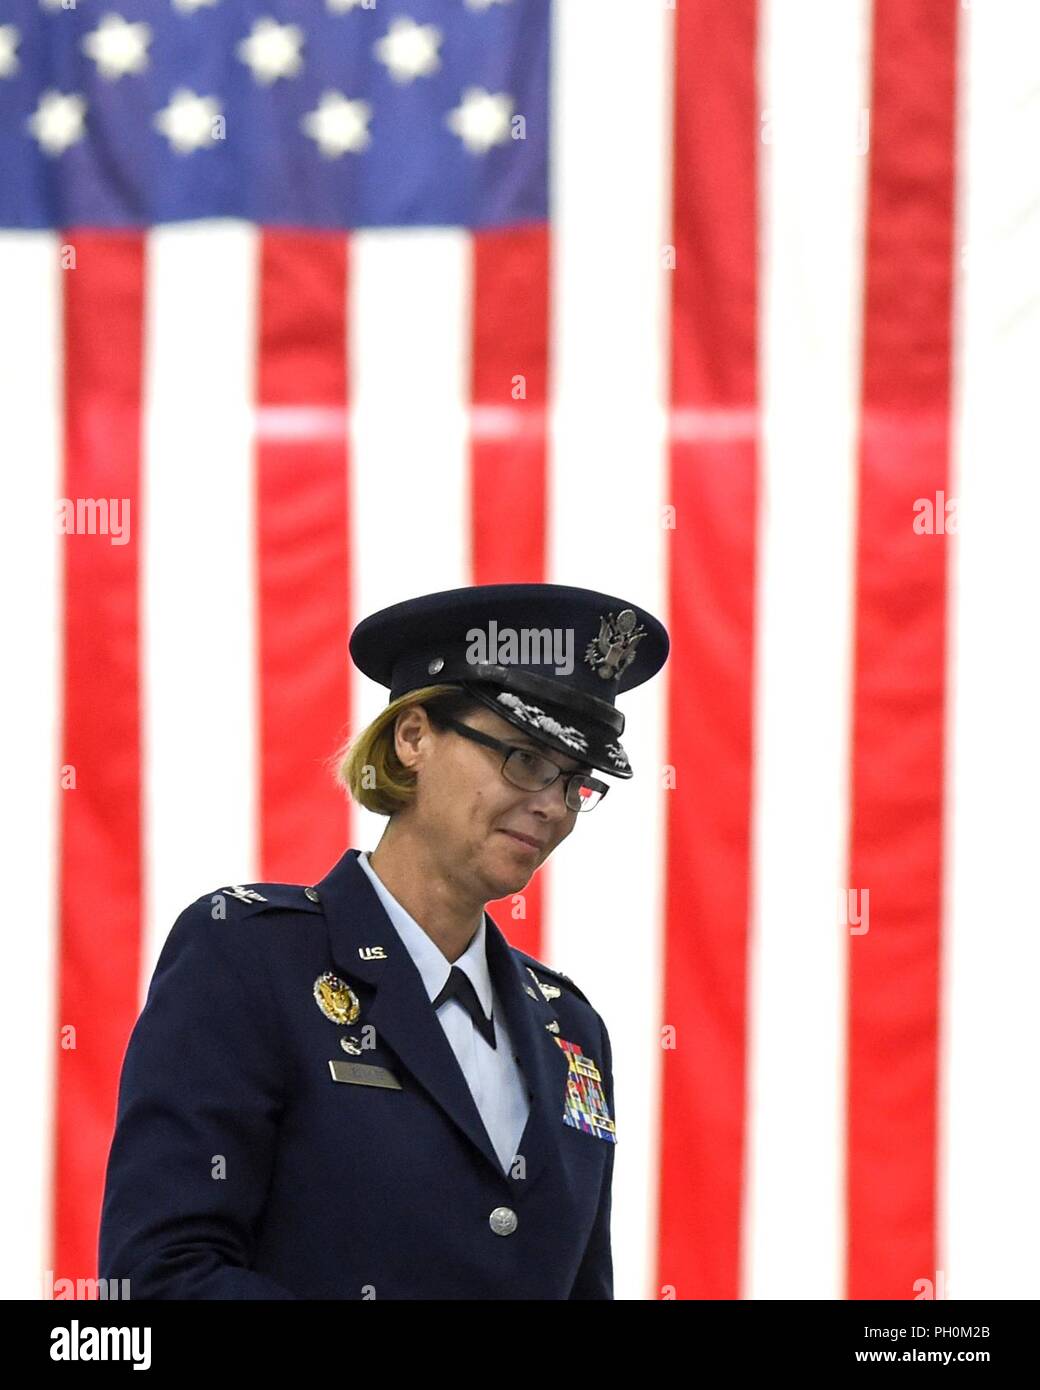 Col. Rebecca Sonkiss, 89th Airlift Wing commander takes to the podium, June 15, 2018 during a change of command ceremony at Joint Base Andrews, Md. Sonkiss assumed command of the 89th AW from Col. Casey Eaton. Sonkiss is a command pilot with more than 4,200 hours in the T-37B, T-44, EC-130/H, RQ-1A/B, C-130J and C-17 aircraft. She has 24 years of active-duty service and arrived at JBA from Joint Base Lewis-McCord, Wash. where she was the 62nd Airlift Wing commander. Stock Photo